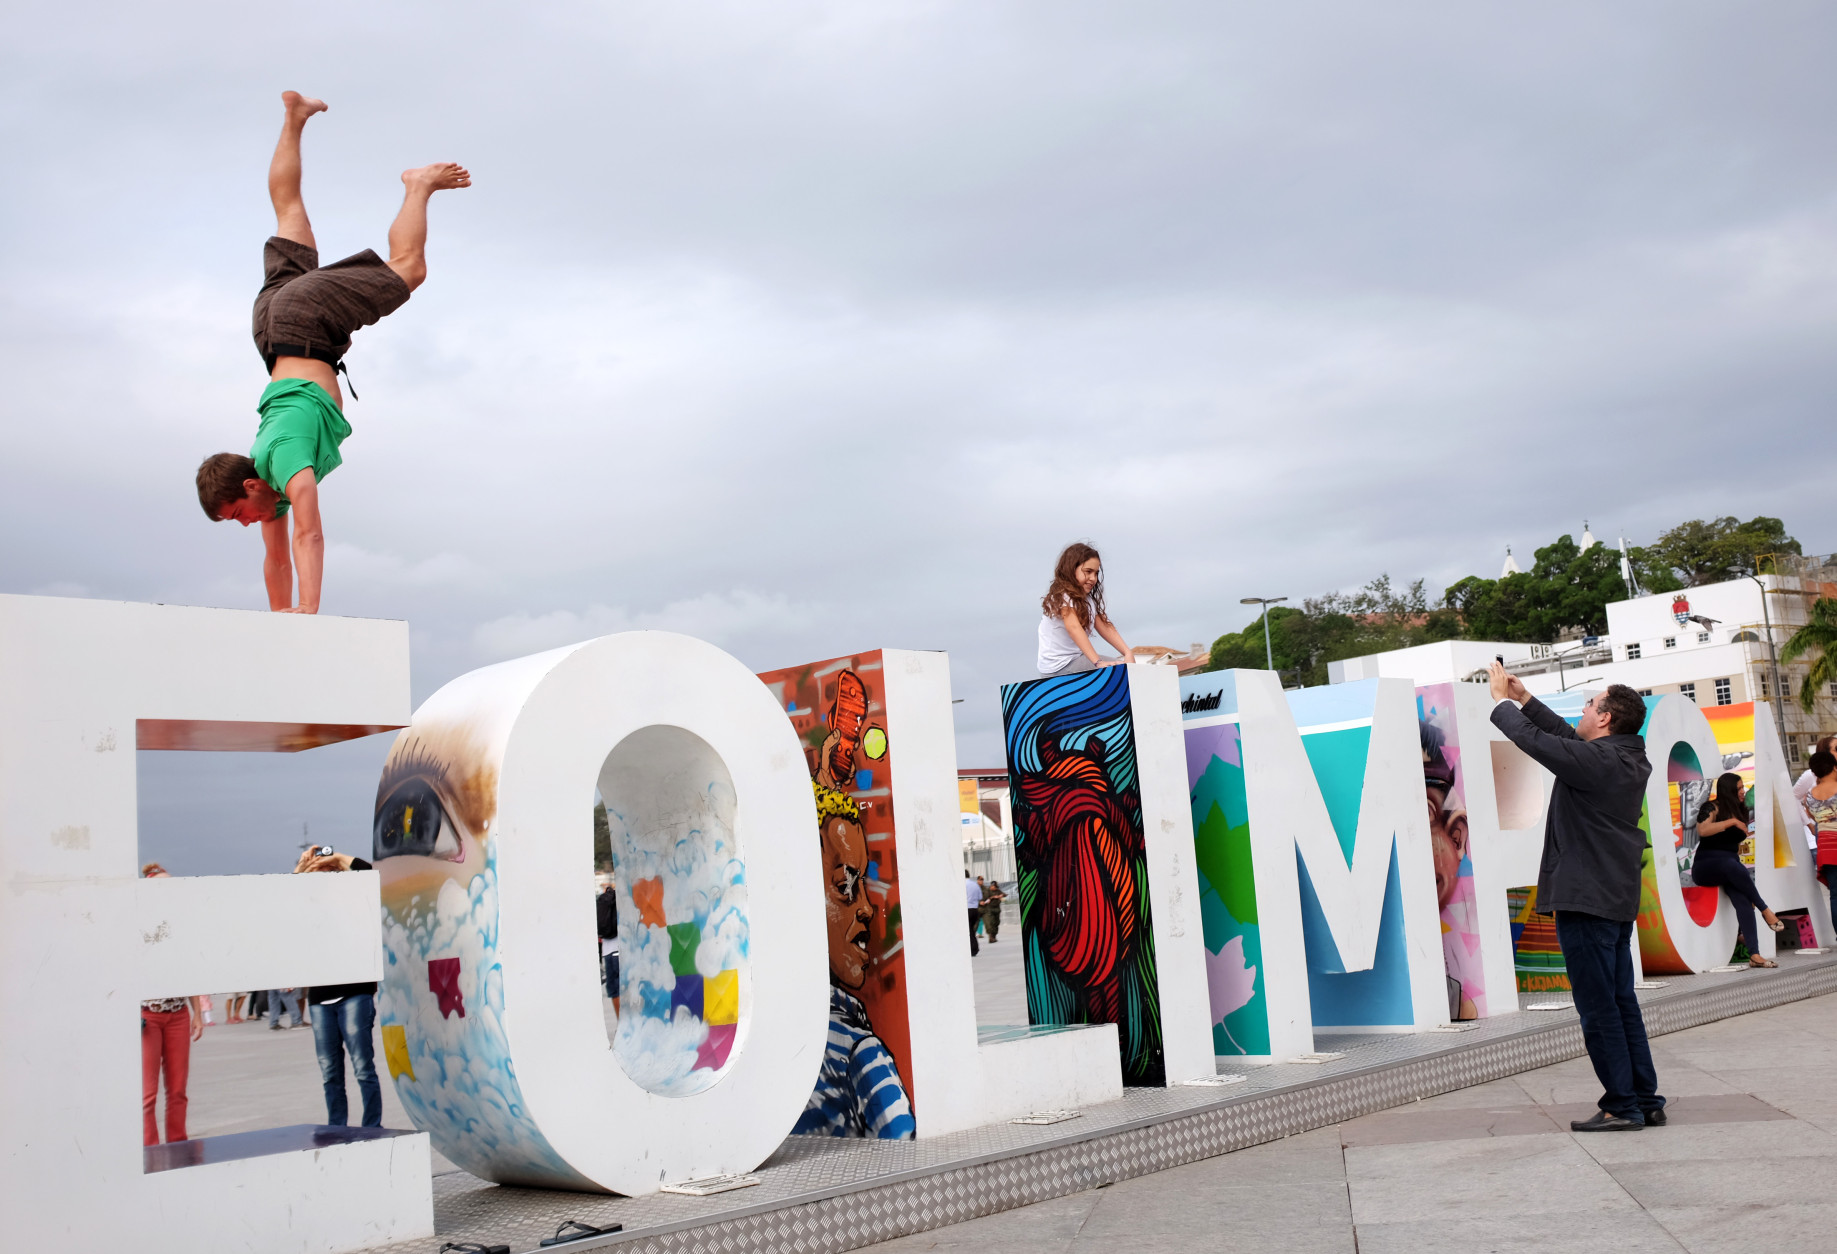 Yves Karrer, of Switzerland, does a handstand atop a sign the reads "Cidade Olimpica" or "Olympic City" outside the Museu do Amanha ahead of the upcoming 2016 Summer Olympics in Rio de Janeiro, Brazil, Wednesday, Aug. 3, 2016. (AP Photo/David Goldman)